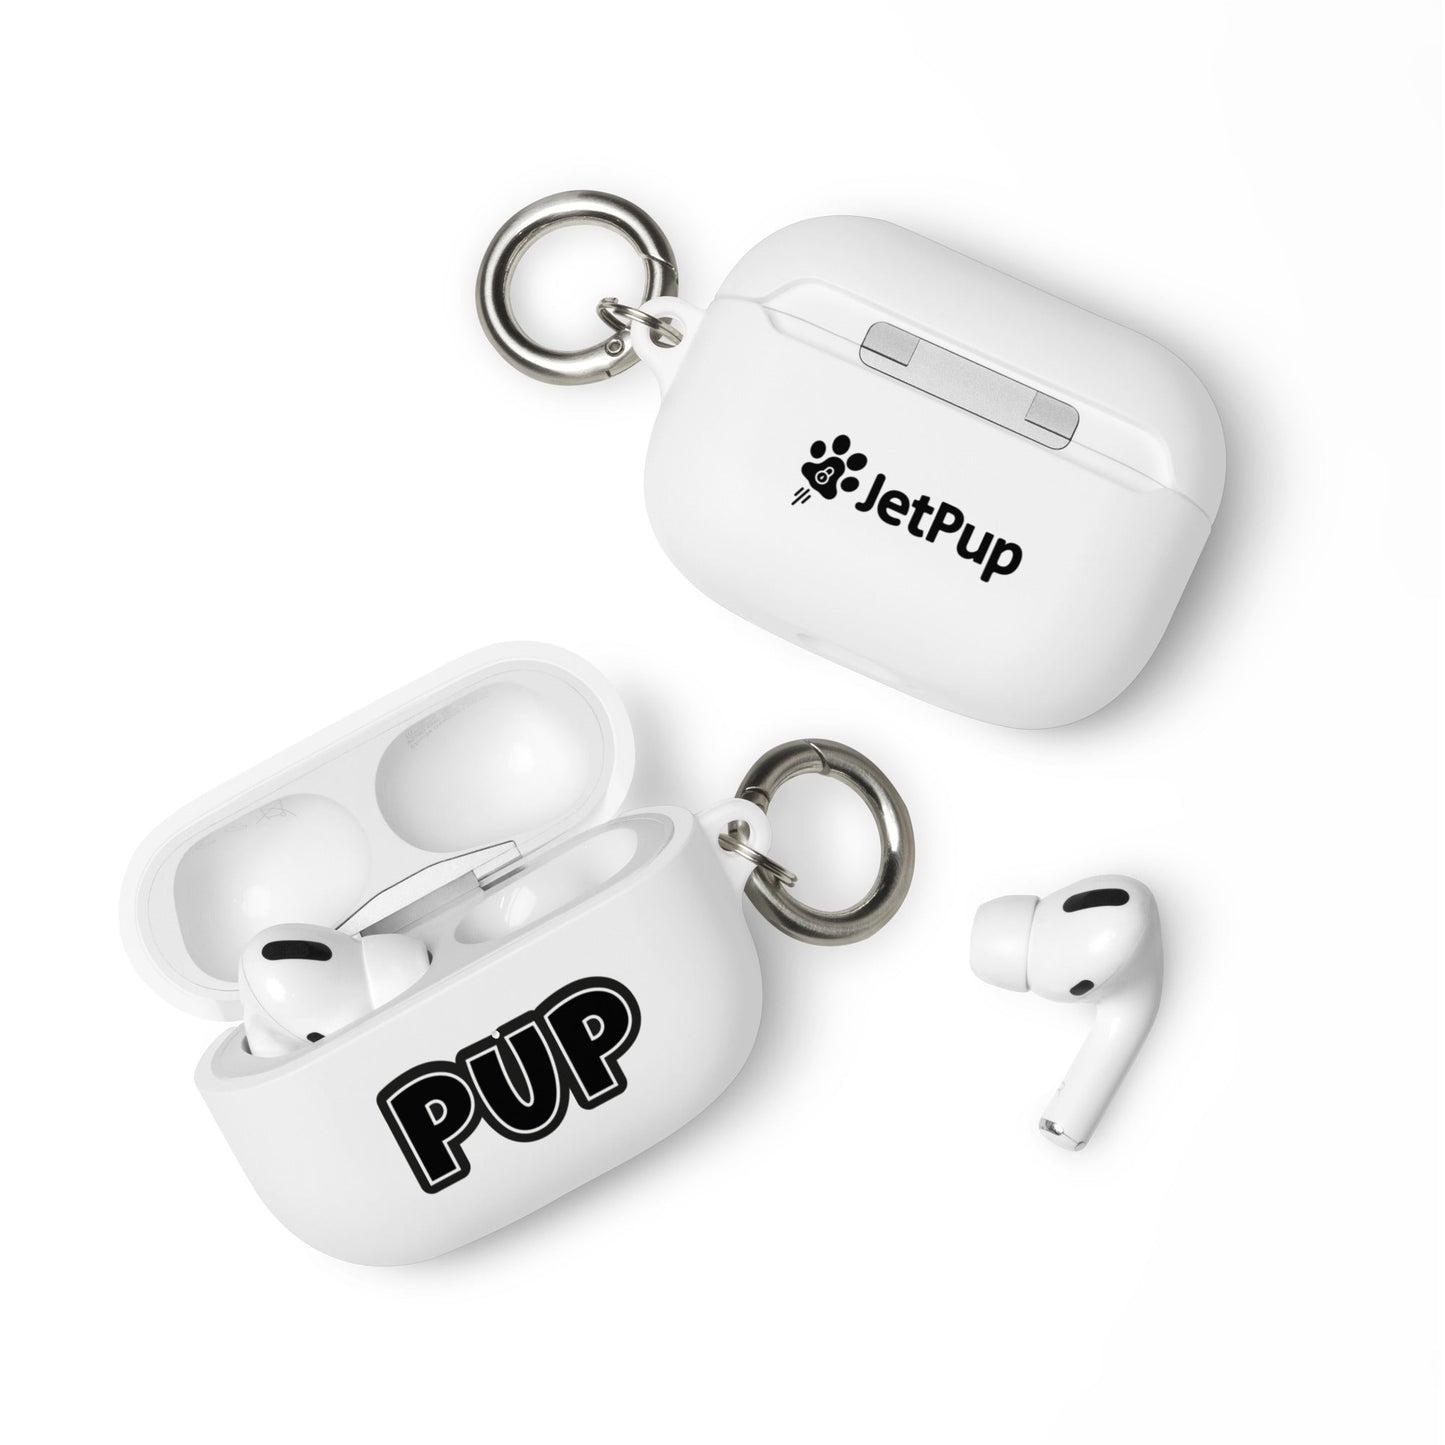 Pup AirPods Case - White - JetPup